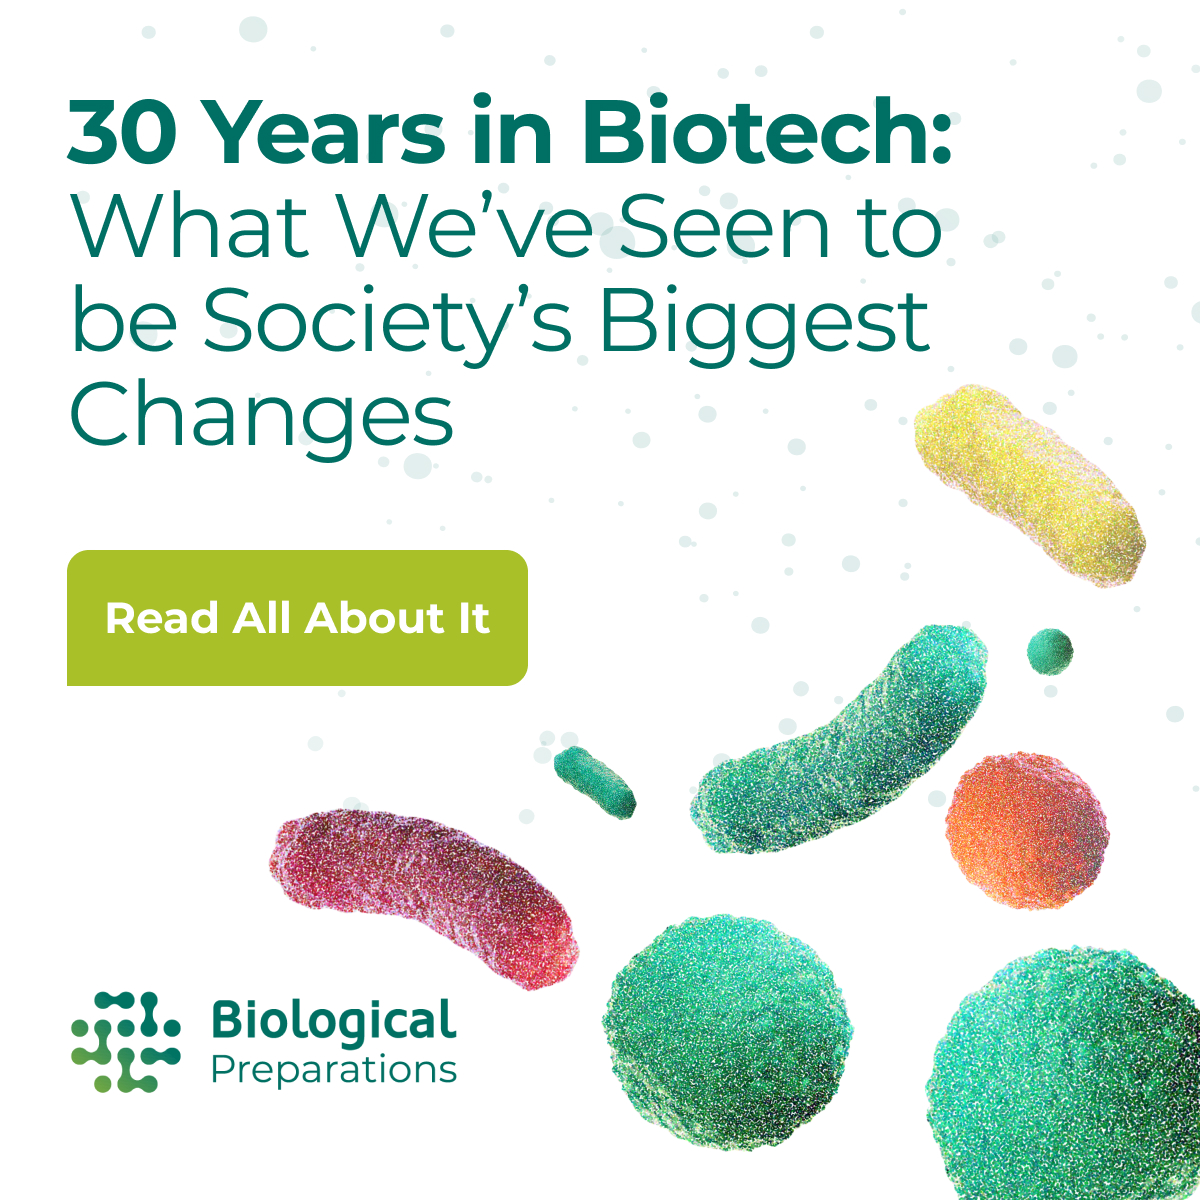 30 Years in Biotech: What has been Society's Biggest Changes?